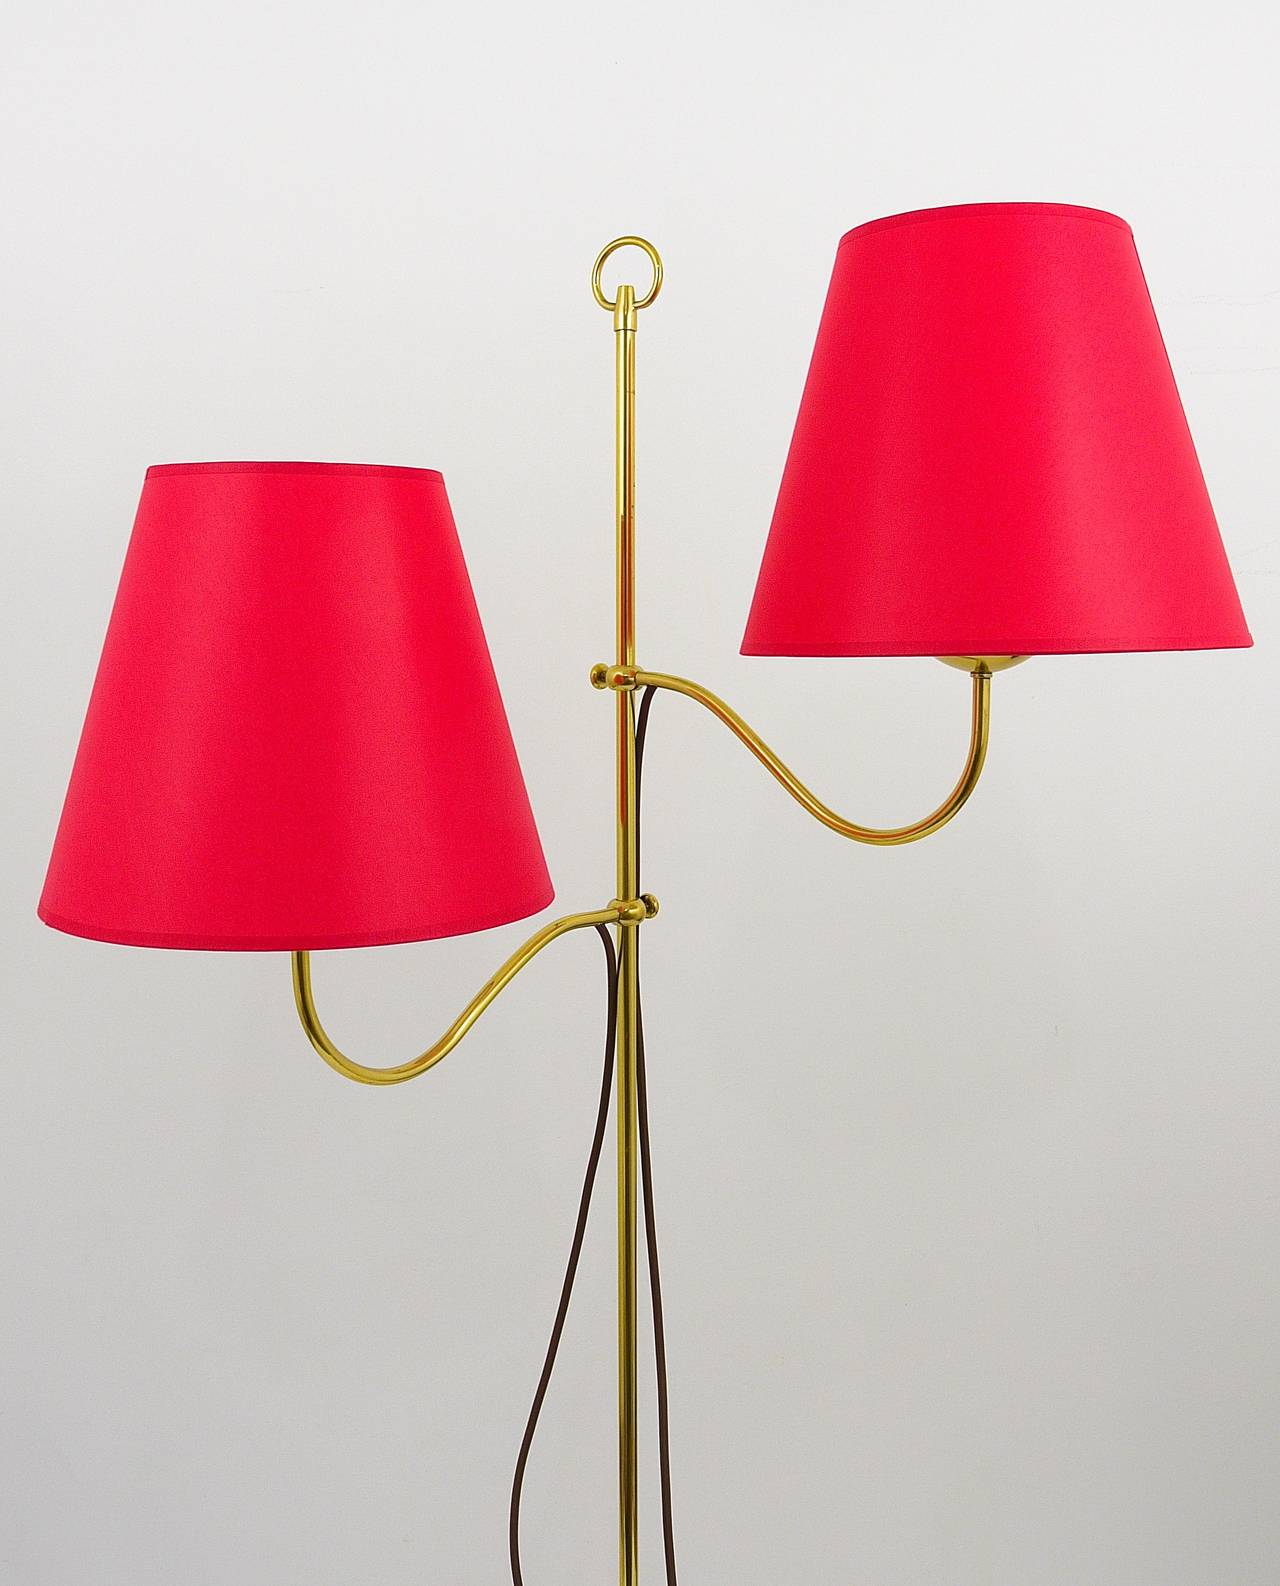 Elegant Two-Arms Mid-Century Brass Floor Lamp by Josef Frank, Austria, 1950 For Sale 2